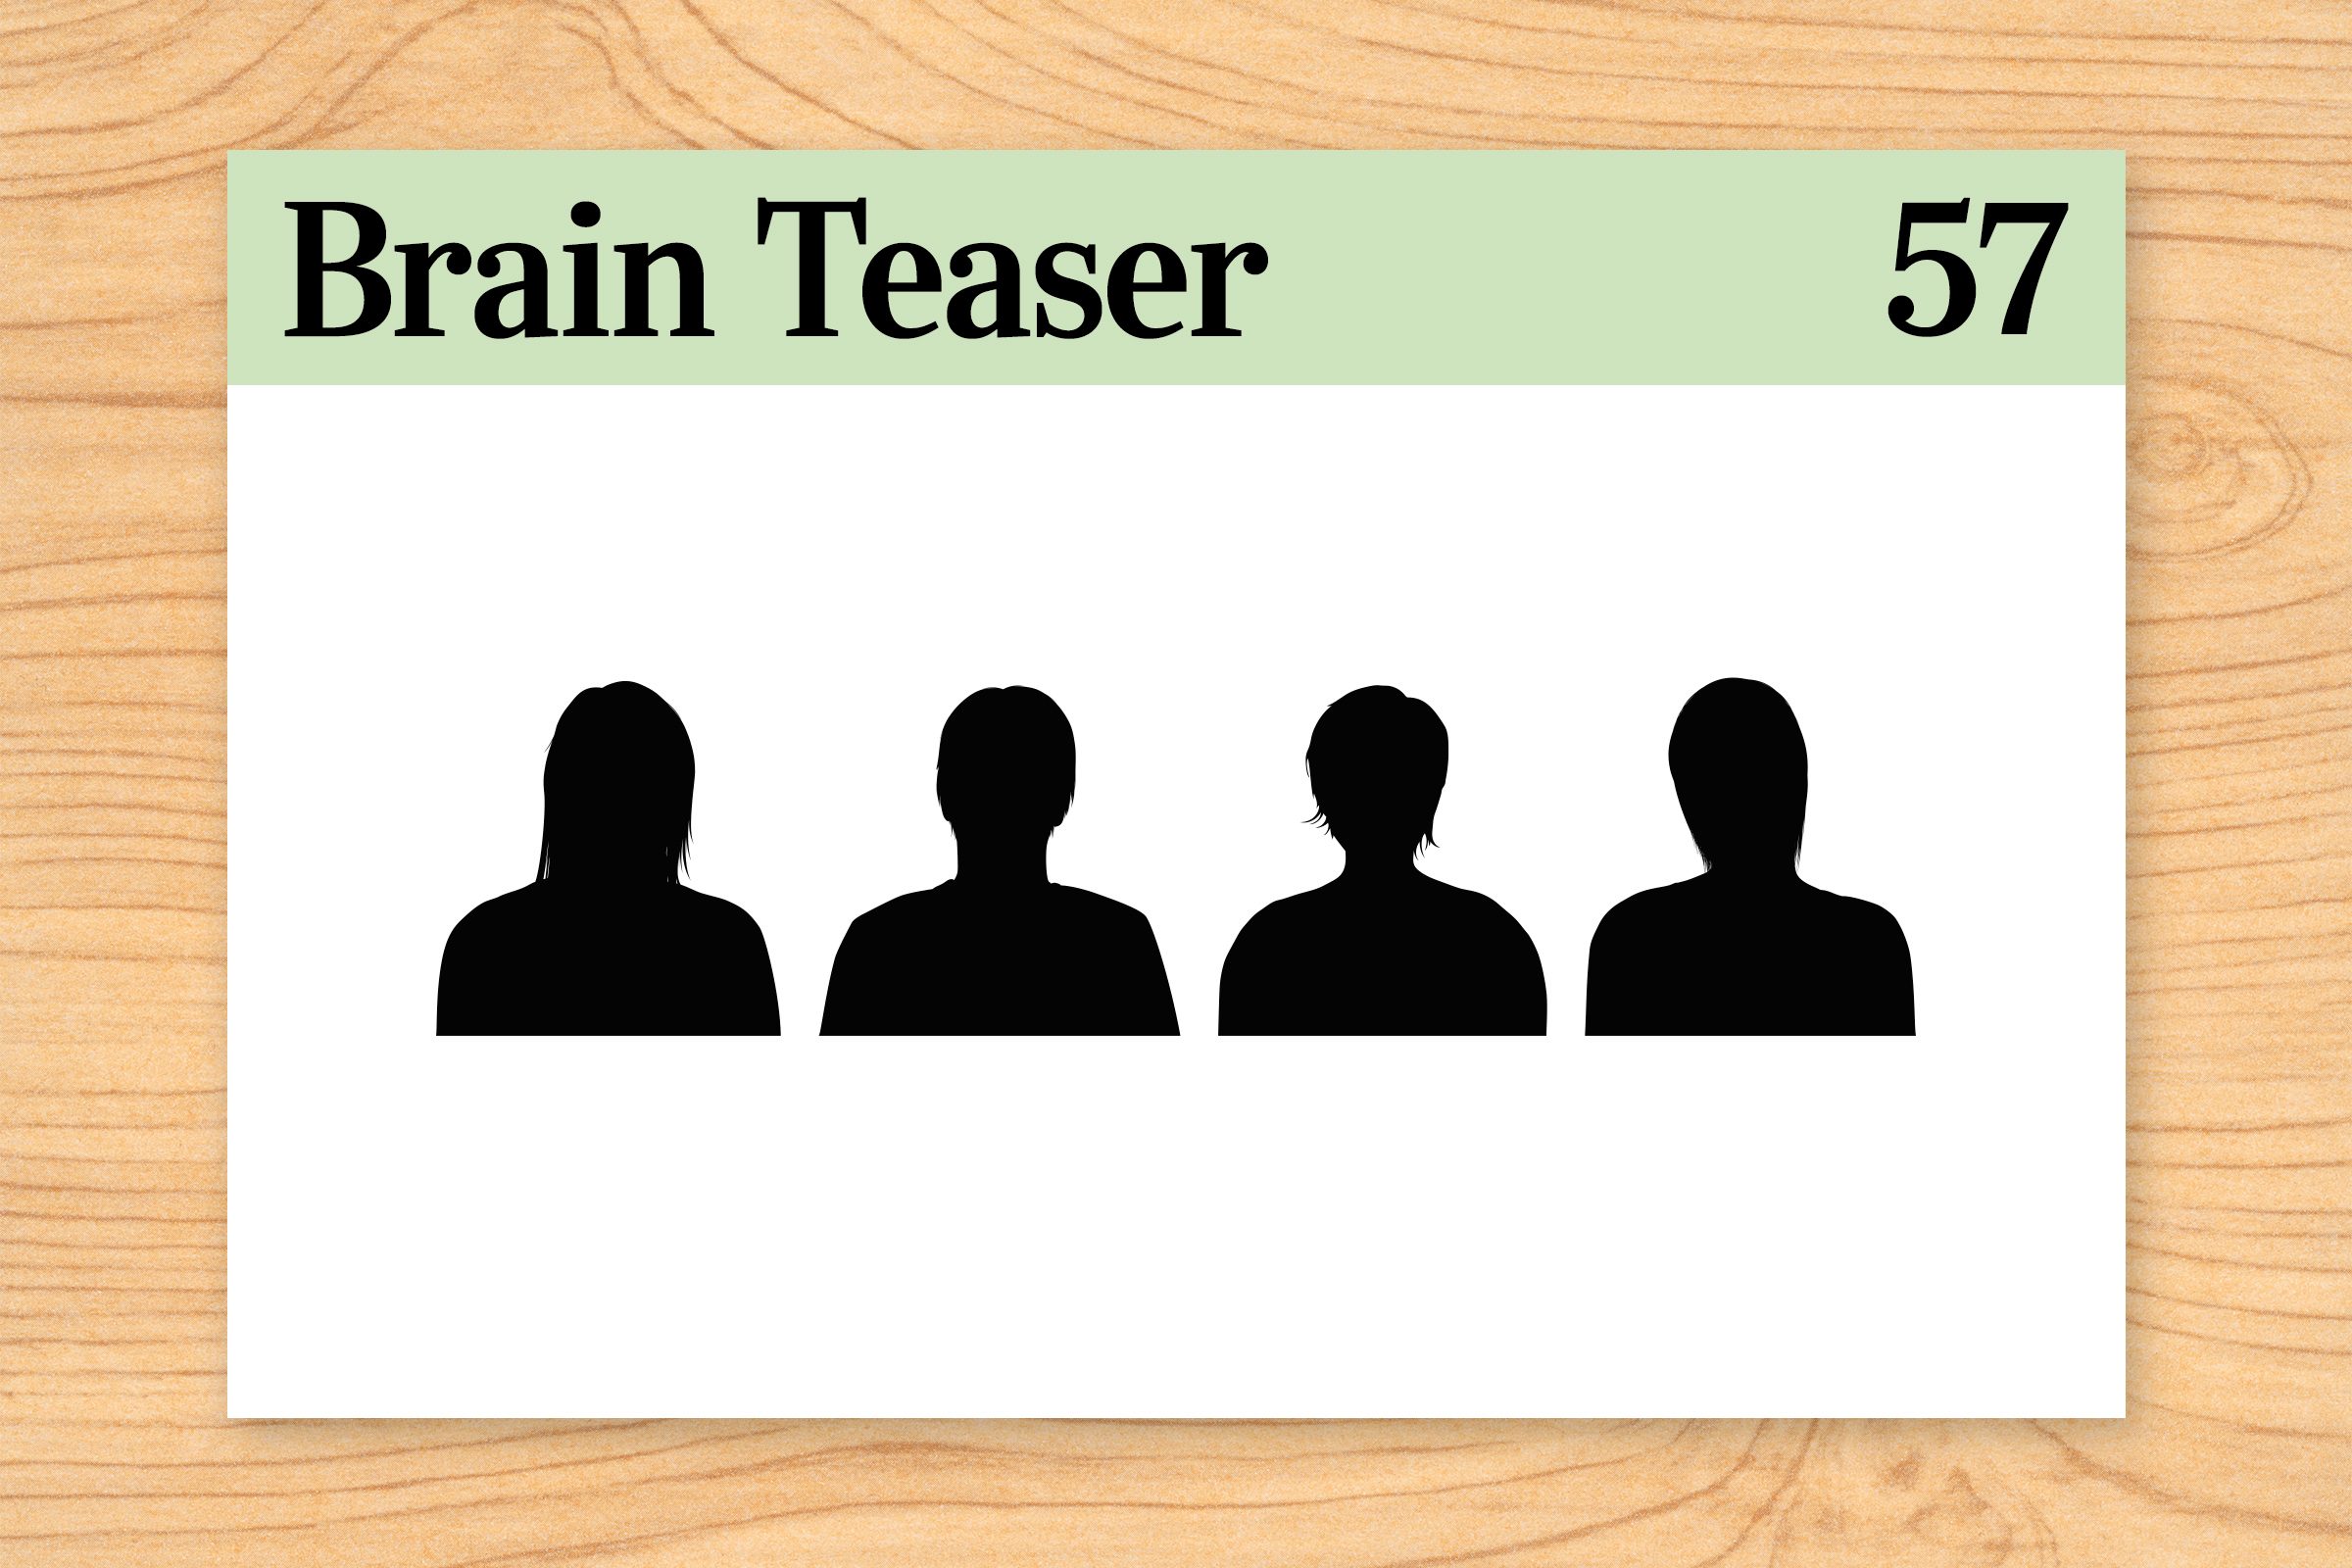 Brain teaser 57, icons of 4 silhouettes